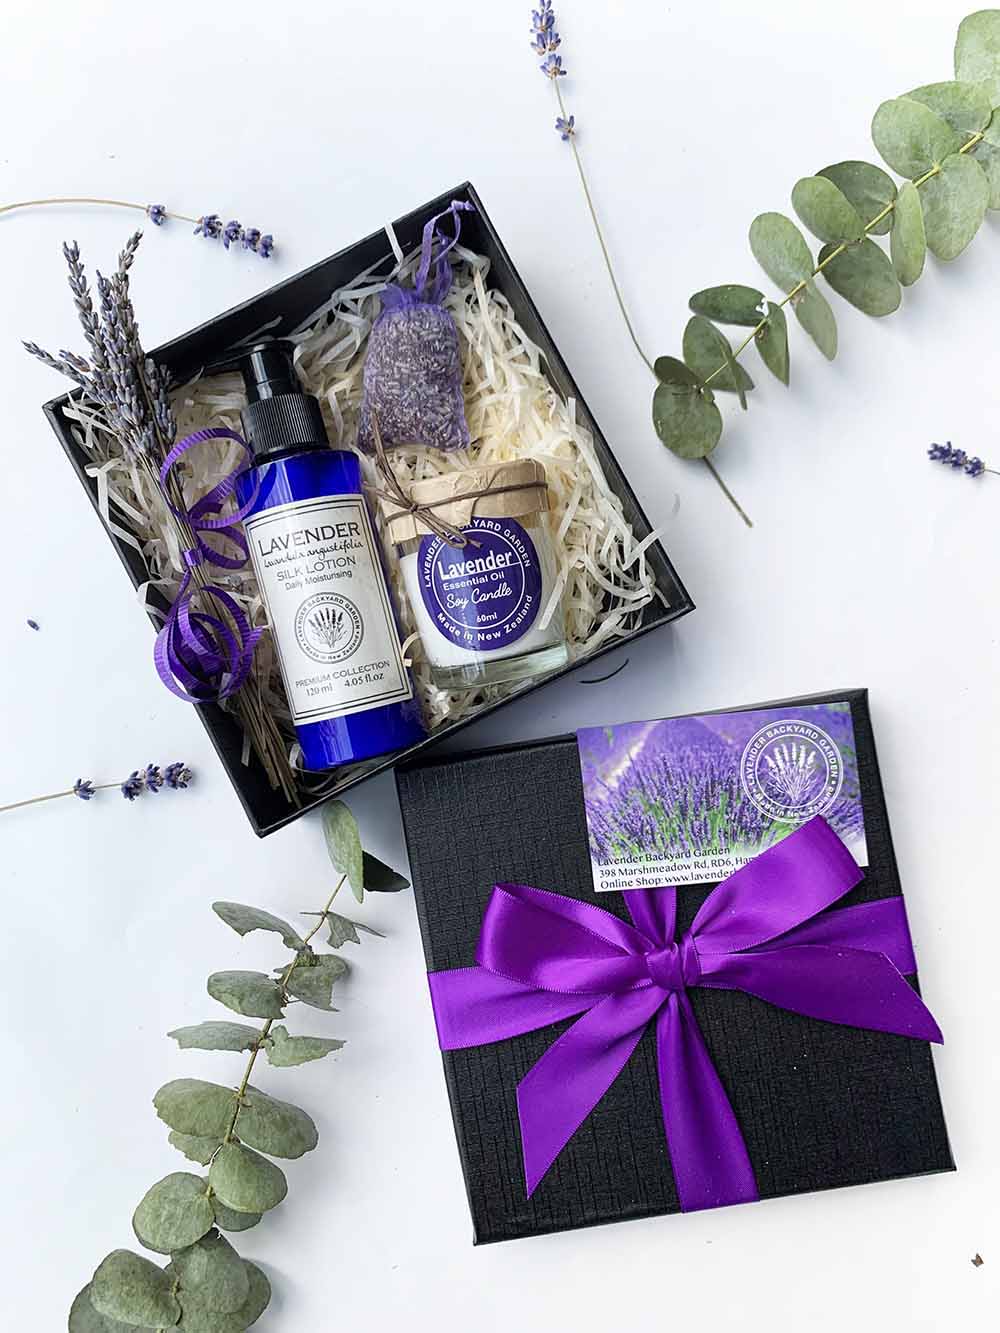 Lavender Aroma Gift Box featuring body lotion and soy candles scented by lavender essential oil, lavender bag and mini dried lavender bouquet from NZ lavender farm